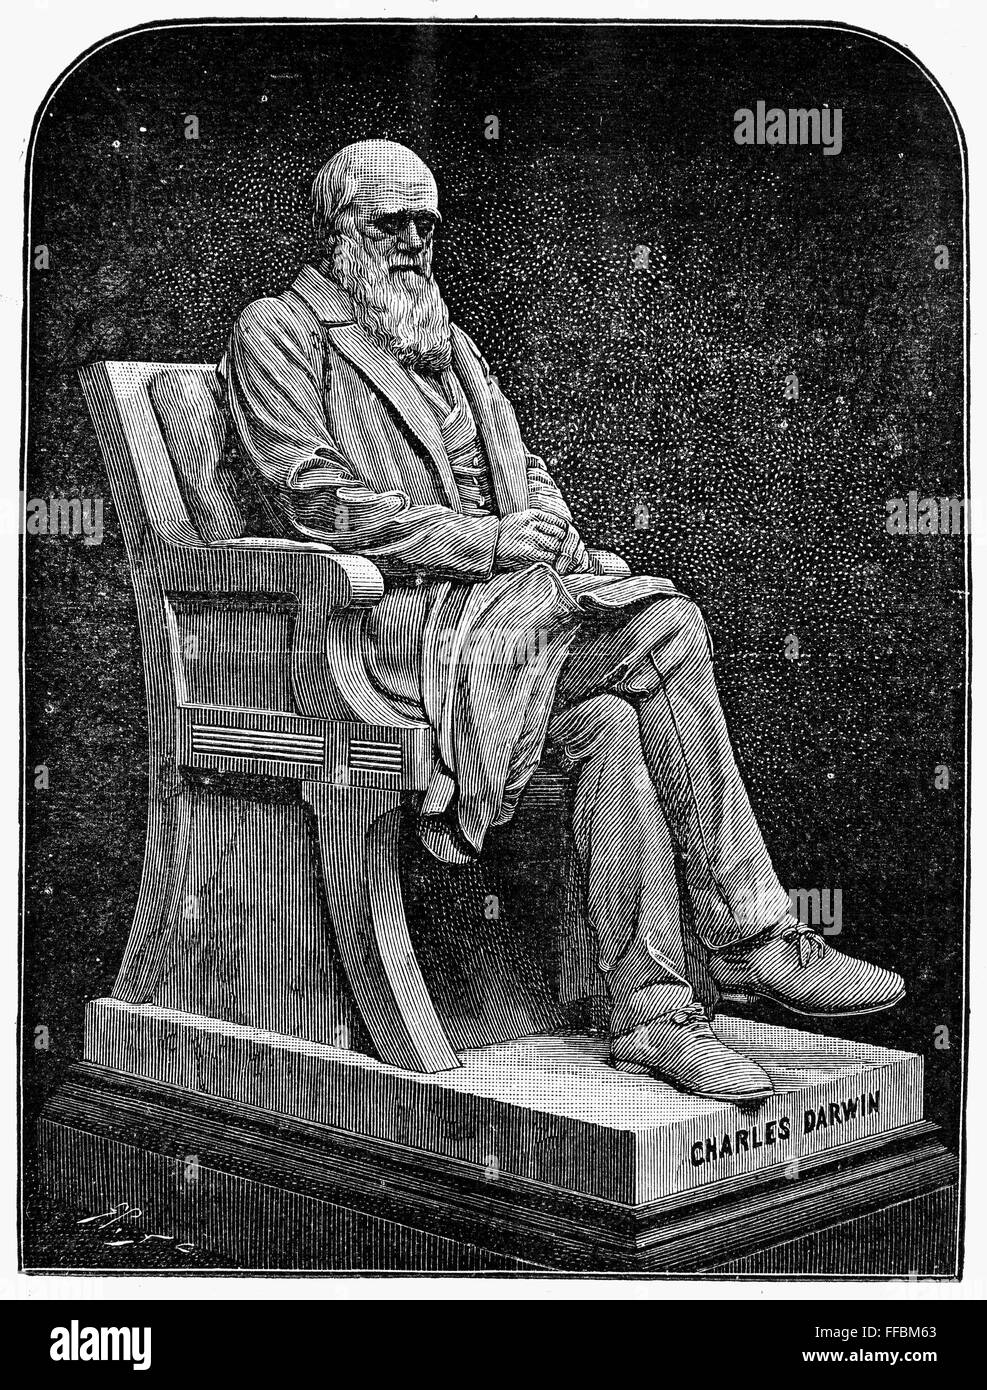 CHARLES DARWIN (1809-1882). /nStatue of Charles Robert Darwin at the Natural History Museum in London, England. Engraving from an English newspaper, 1887. Stock Photo